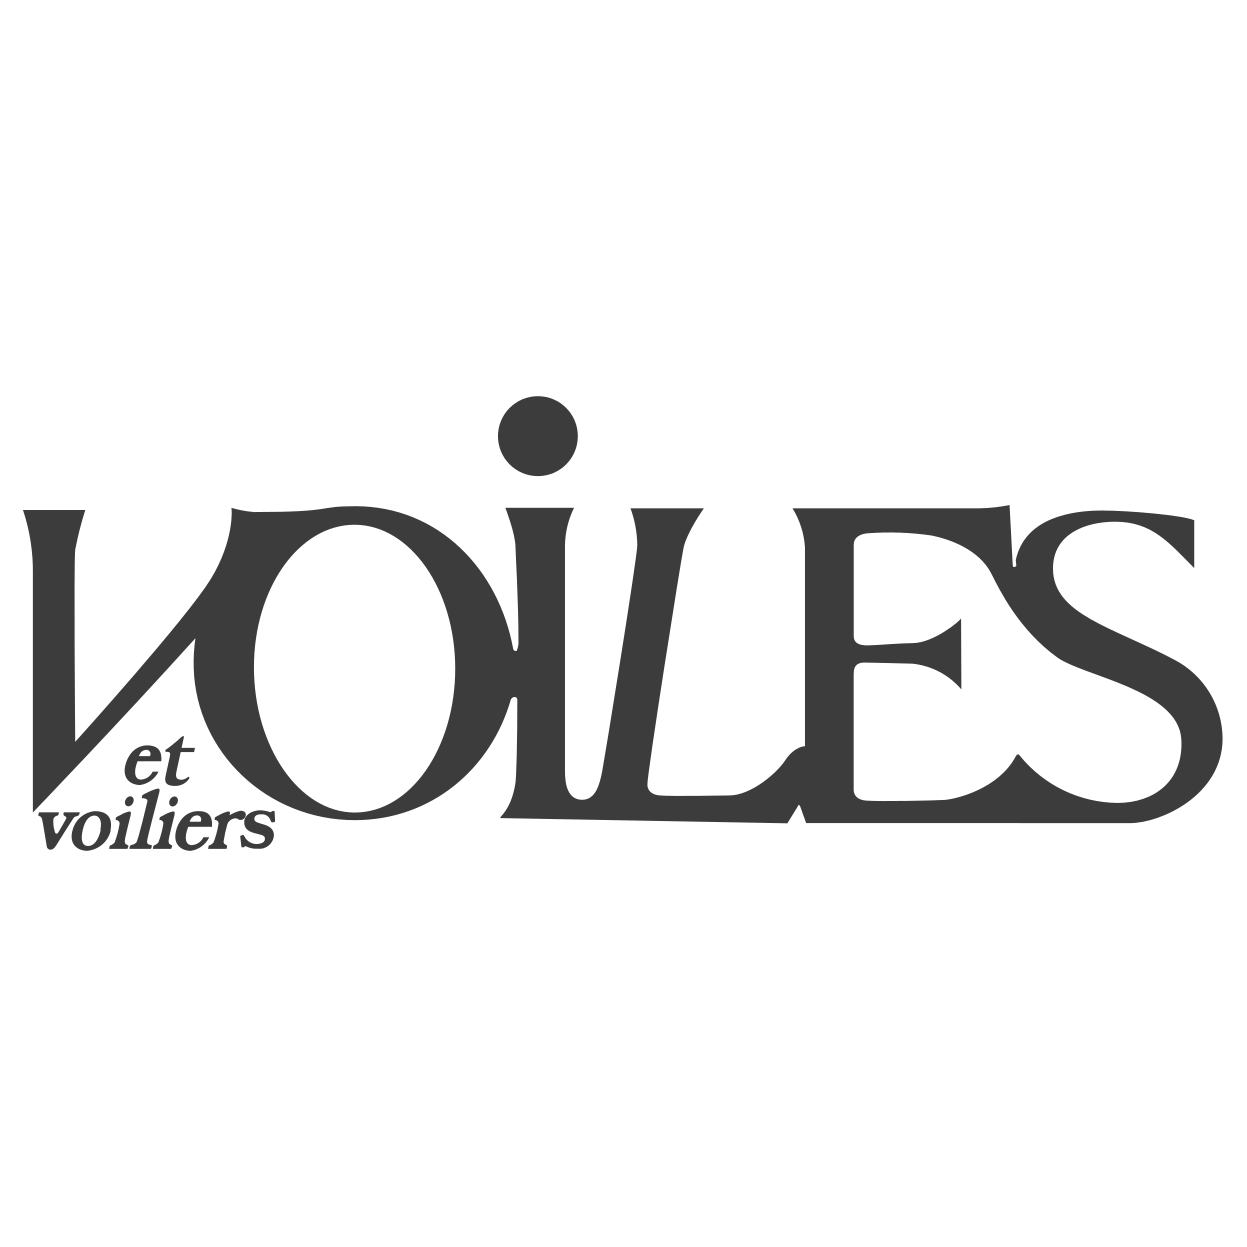 Voiles & voiliers